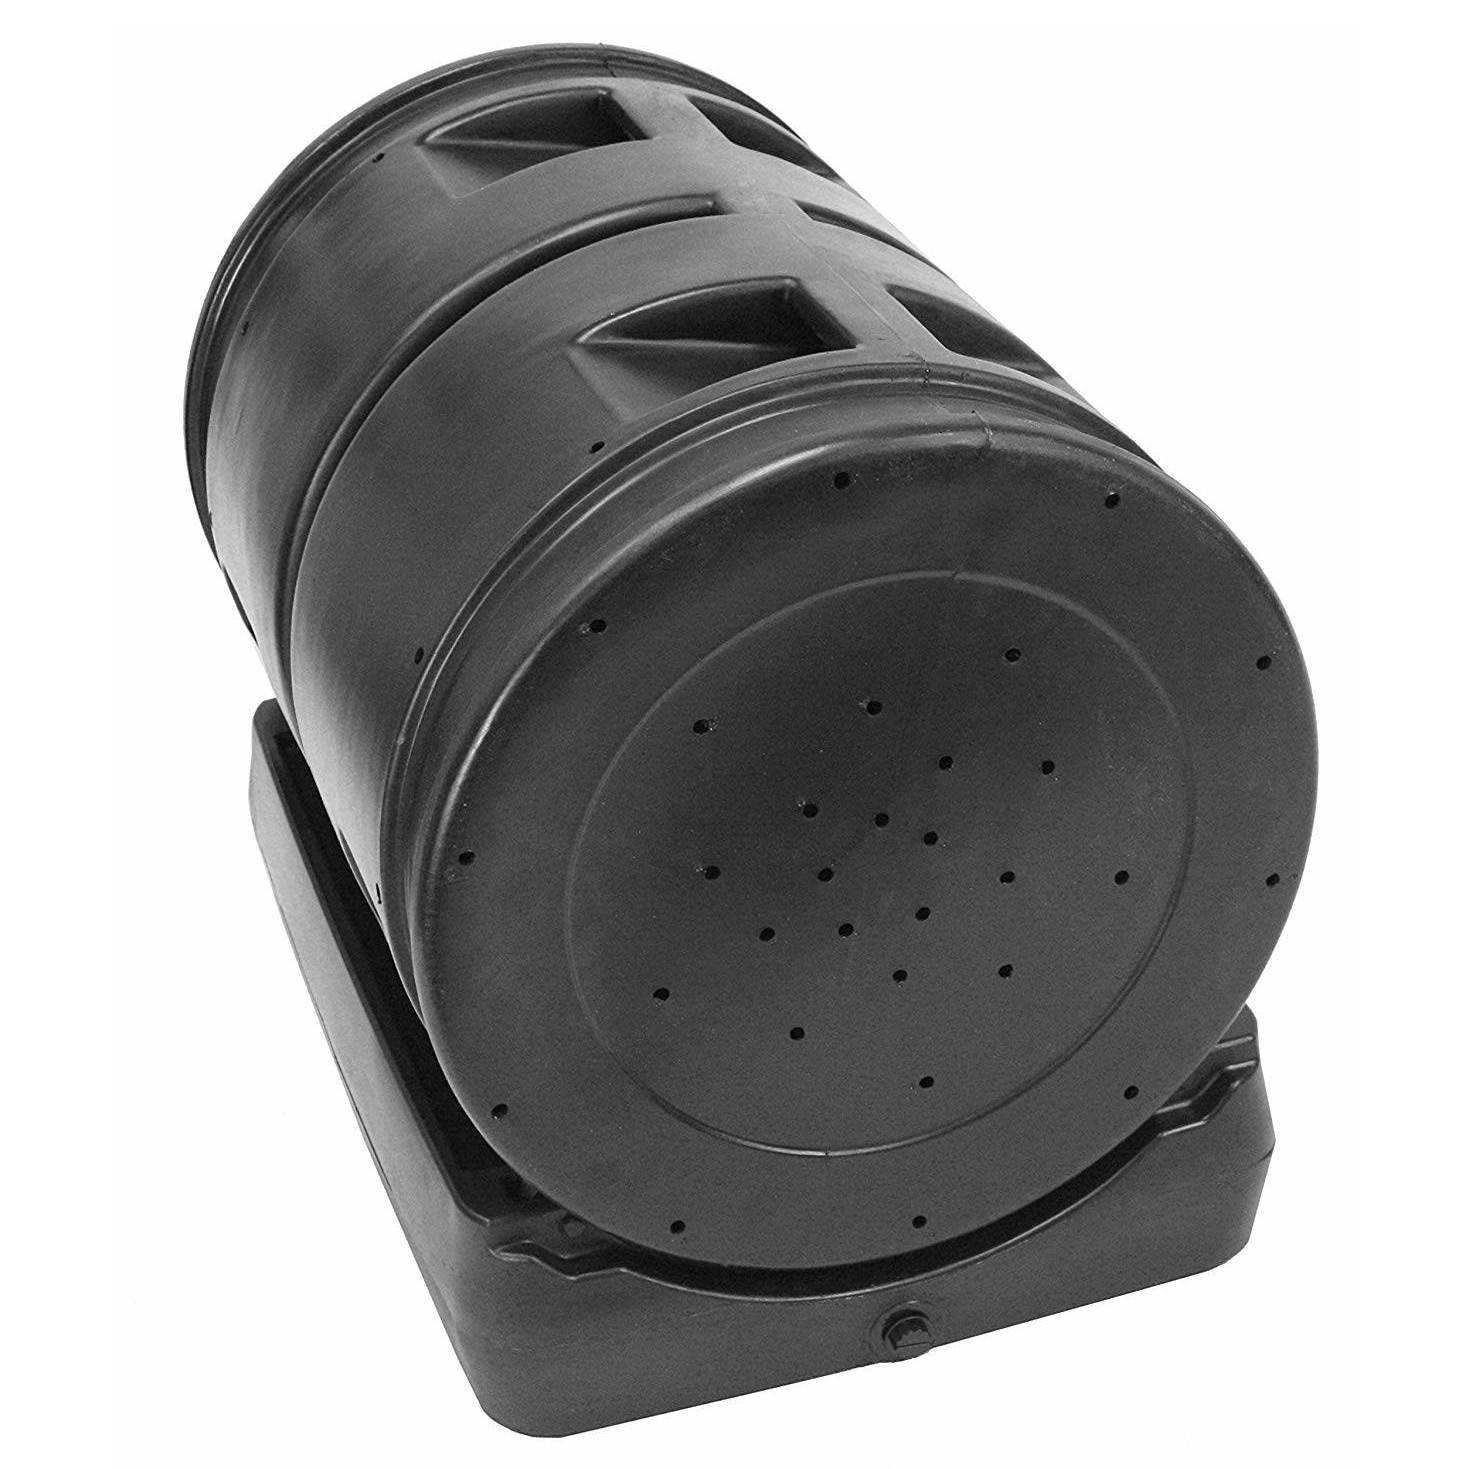 Good Ideas Compost Wizard Outdoor Dual Tumbler Compost Container, Black - image 4 of 10